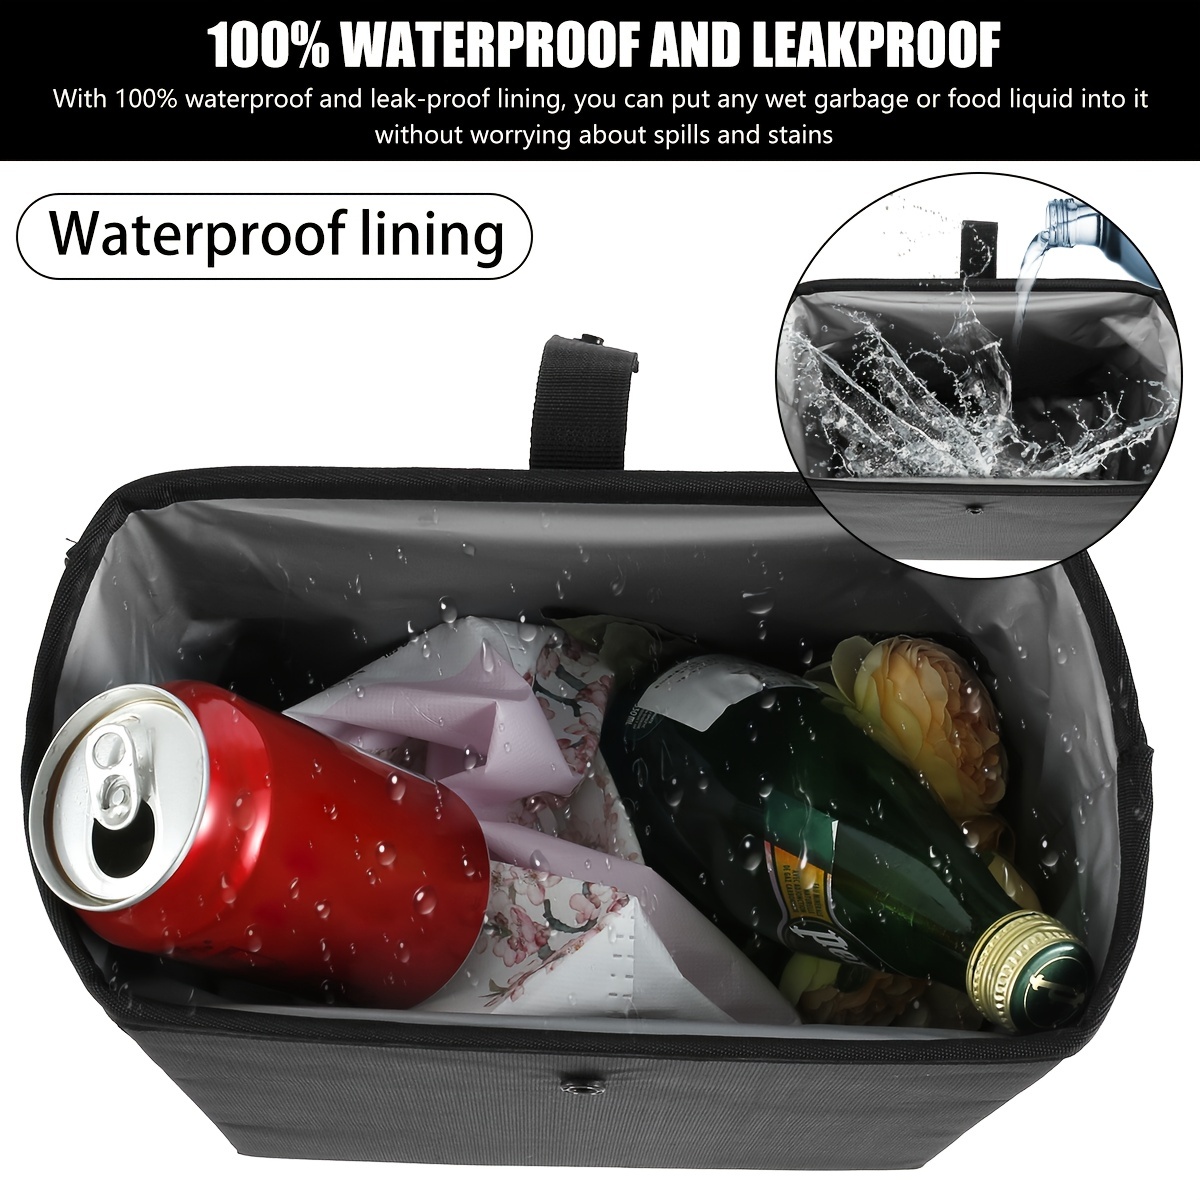 Car Trash Can Waterproof Auto Garbage Bin Spill Proof Container